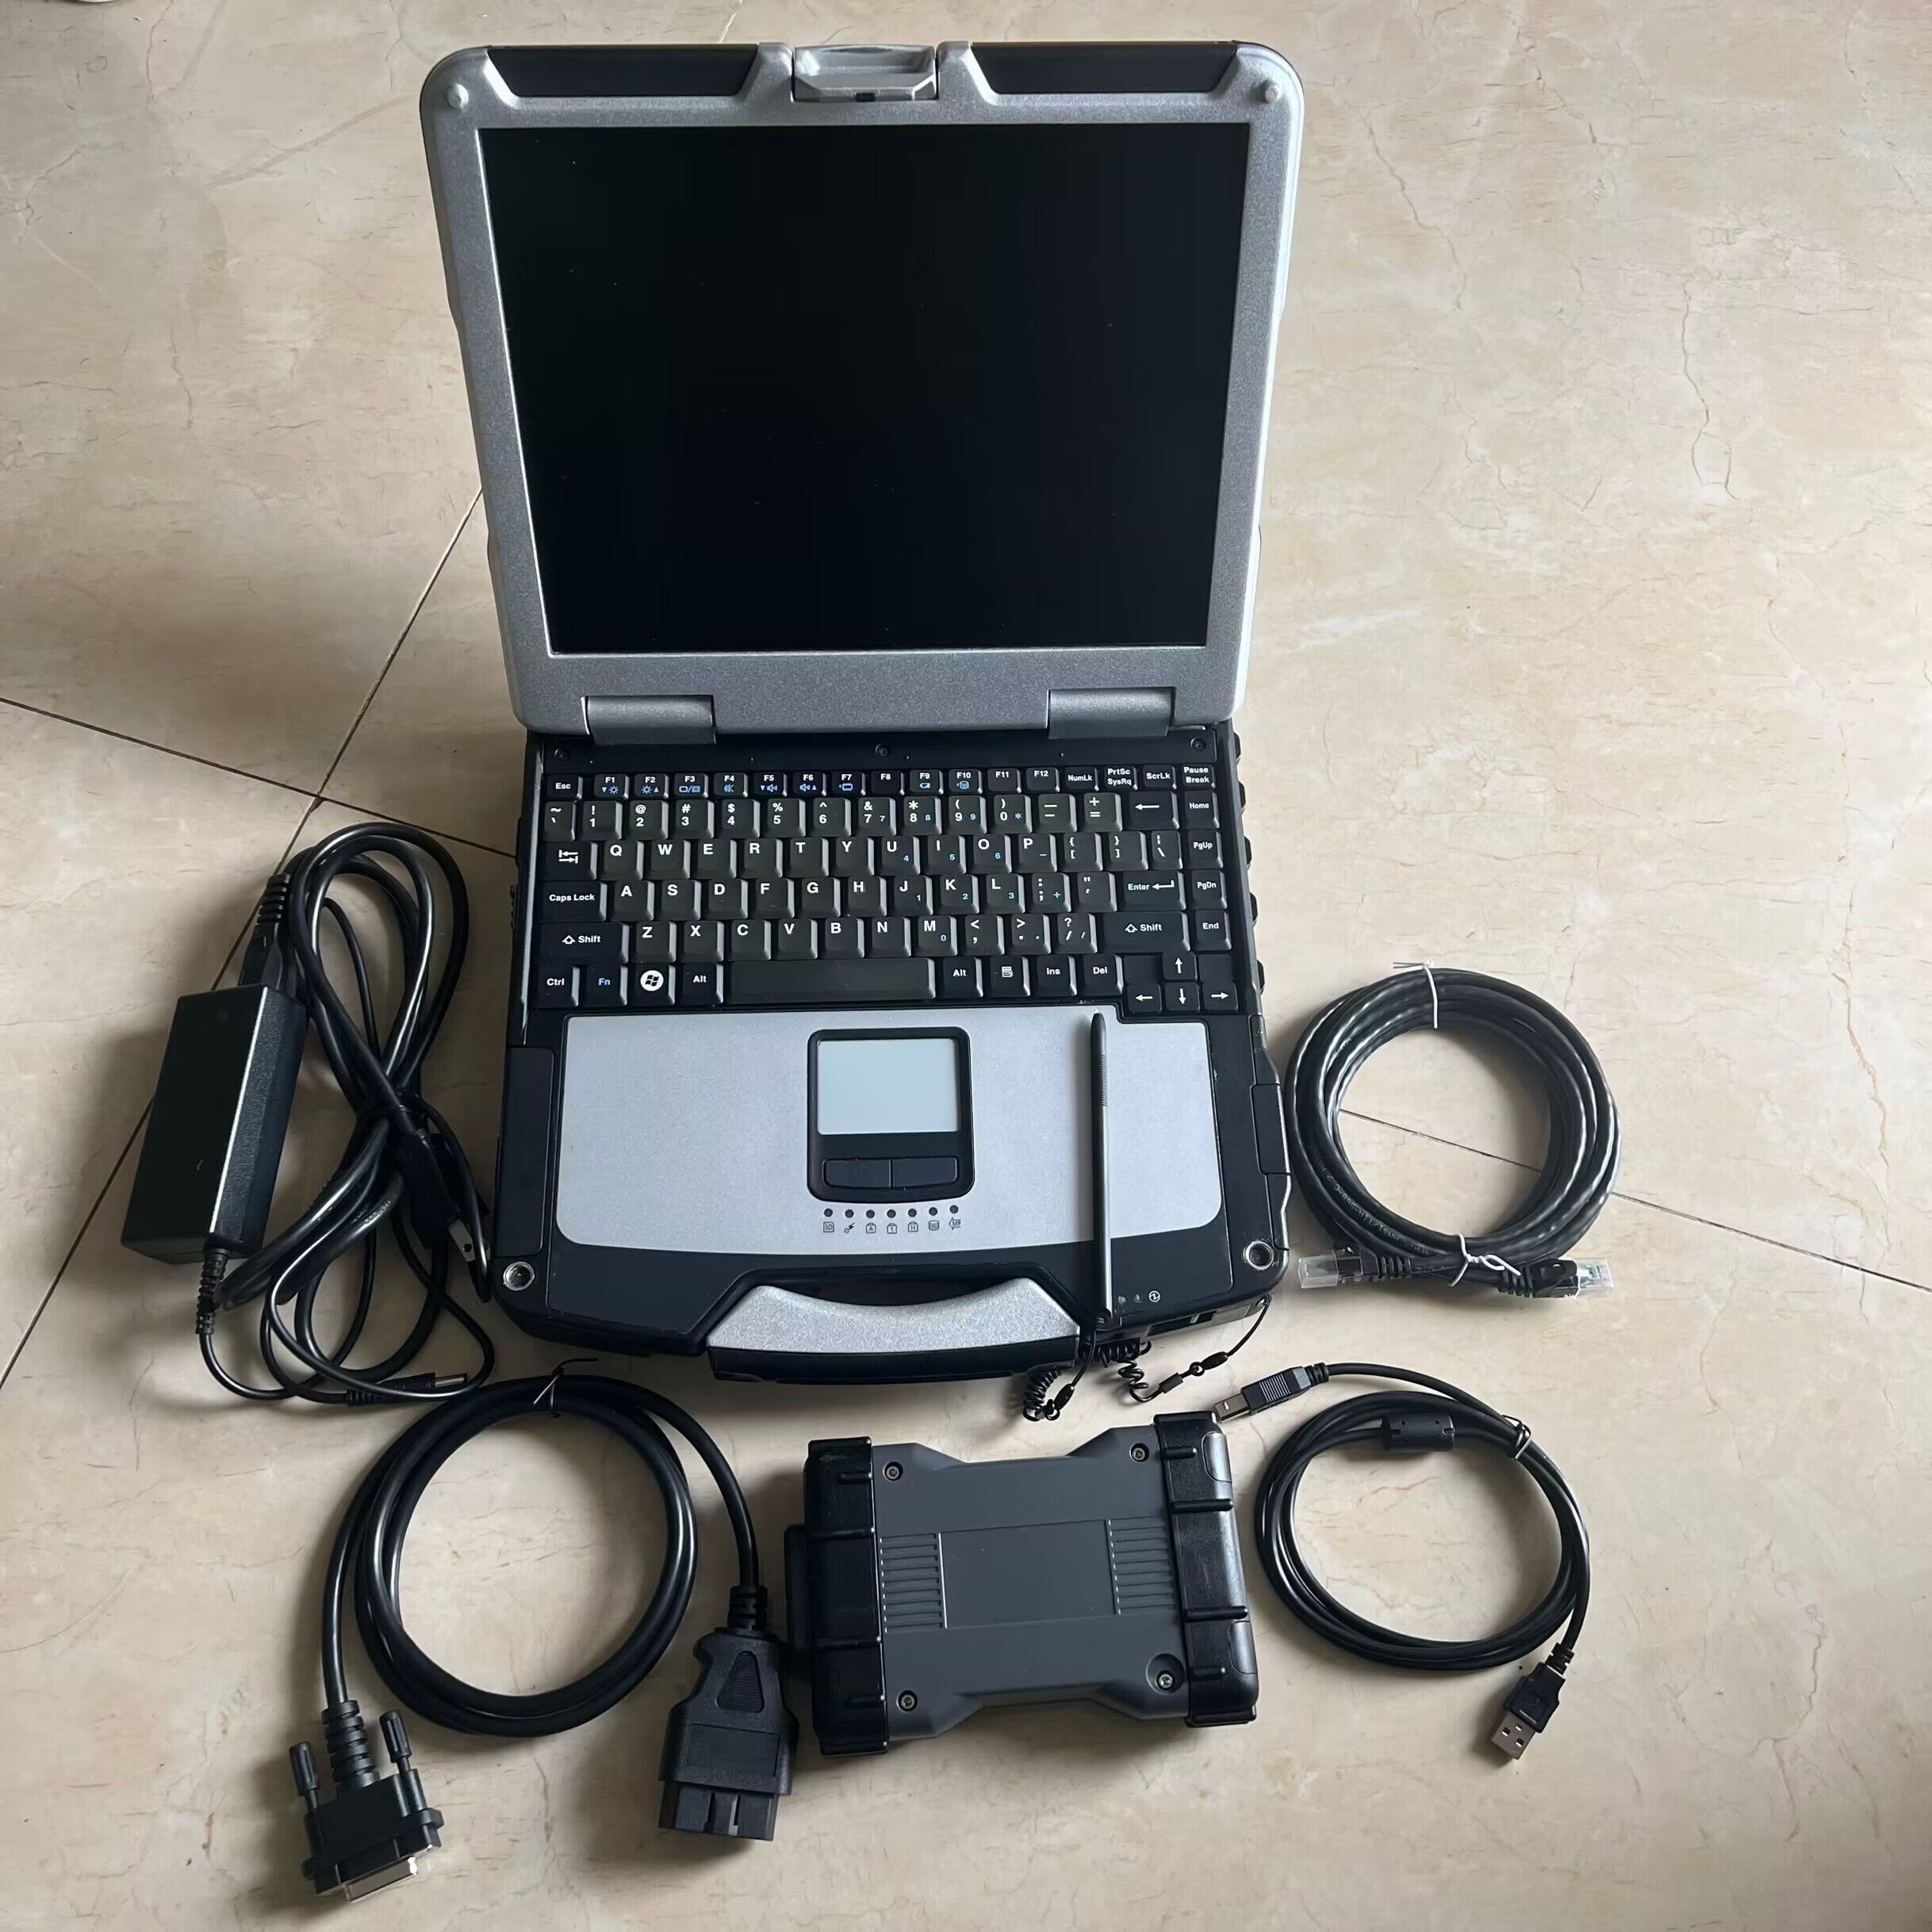 wifi mb star diagnostic c6 sd tool VCI CAN DOIP Protocol SSD 480gb xentry das Laptop Cf30 touch computer Ready to Use 2 Years Warranty